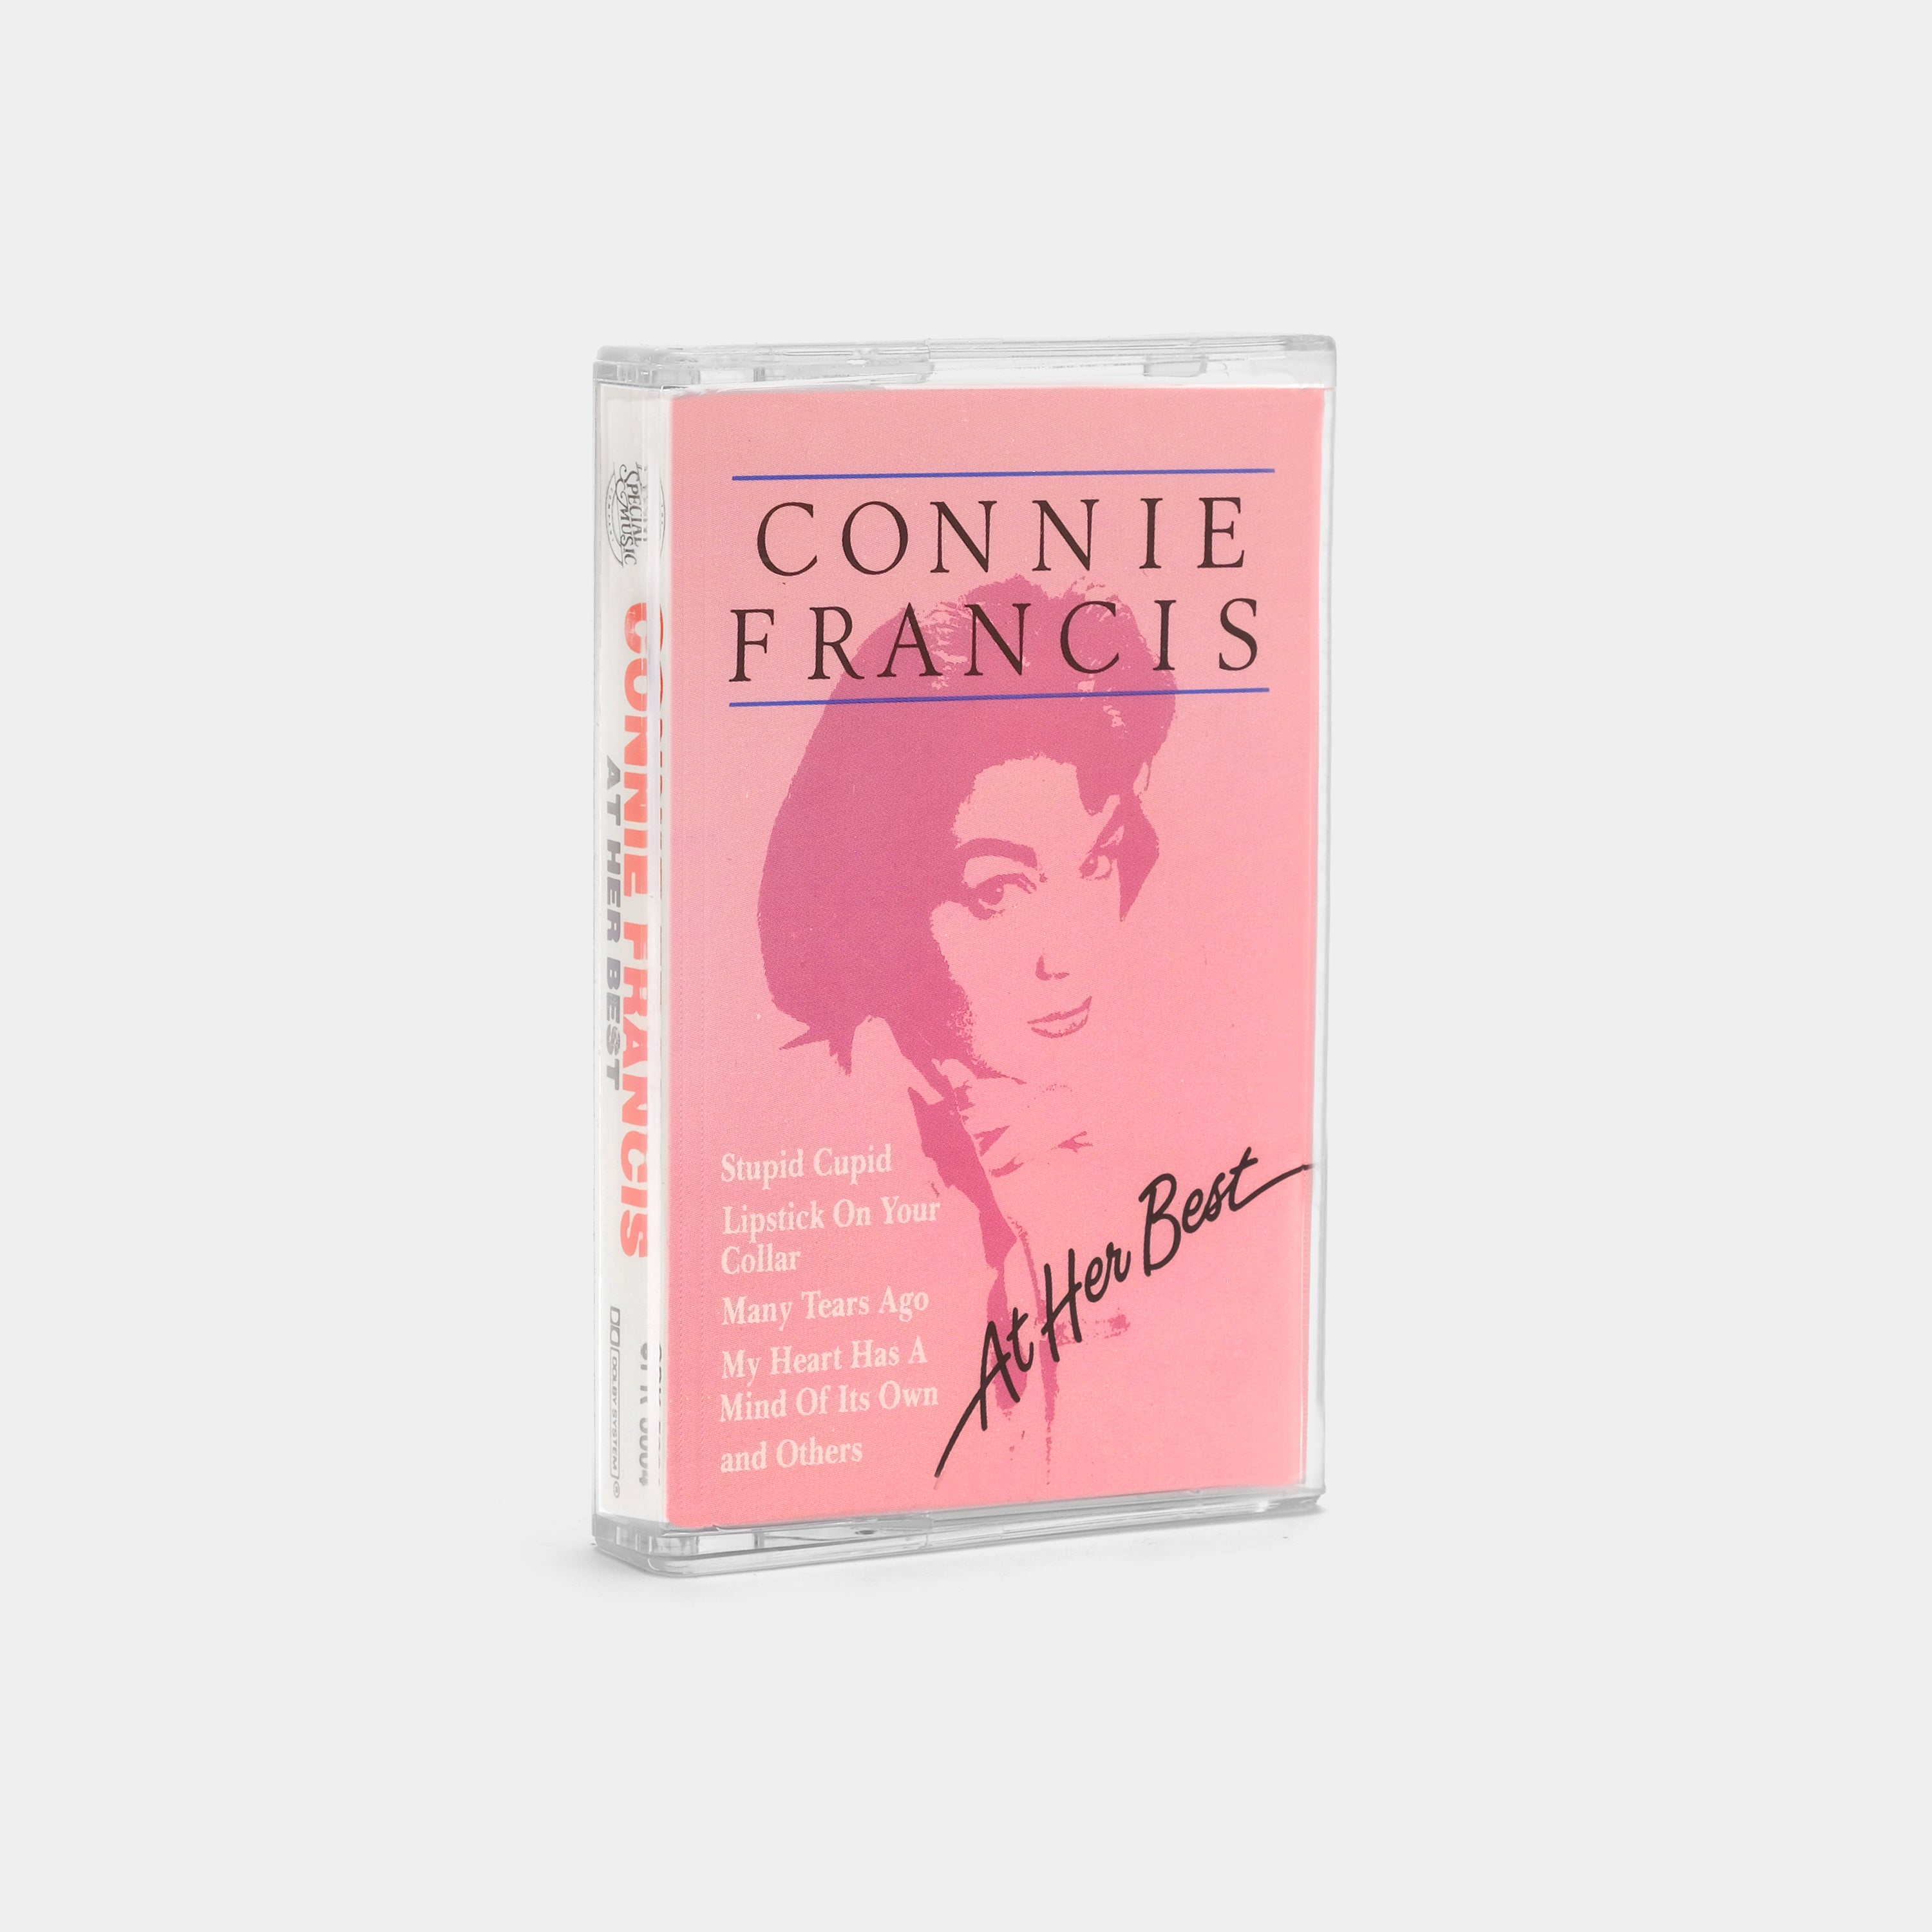 Connie Francis - At Her Best Cassette Tape